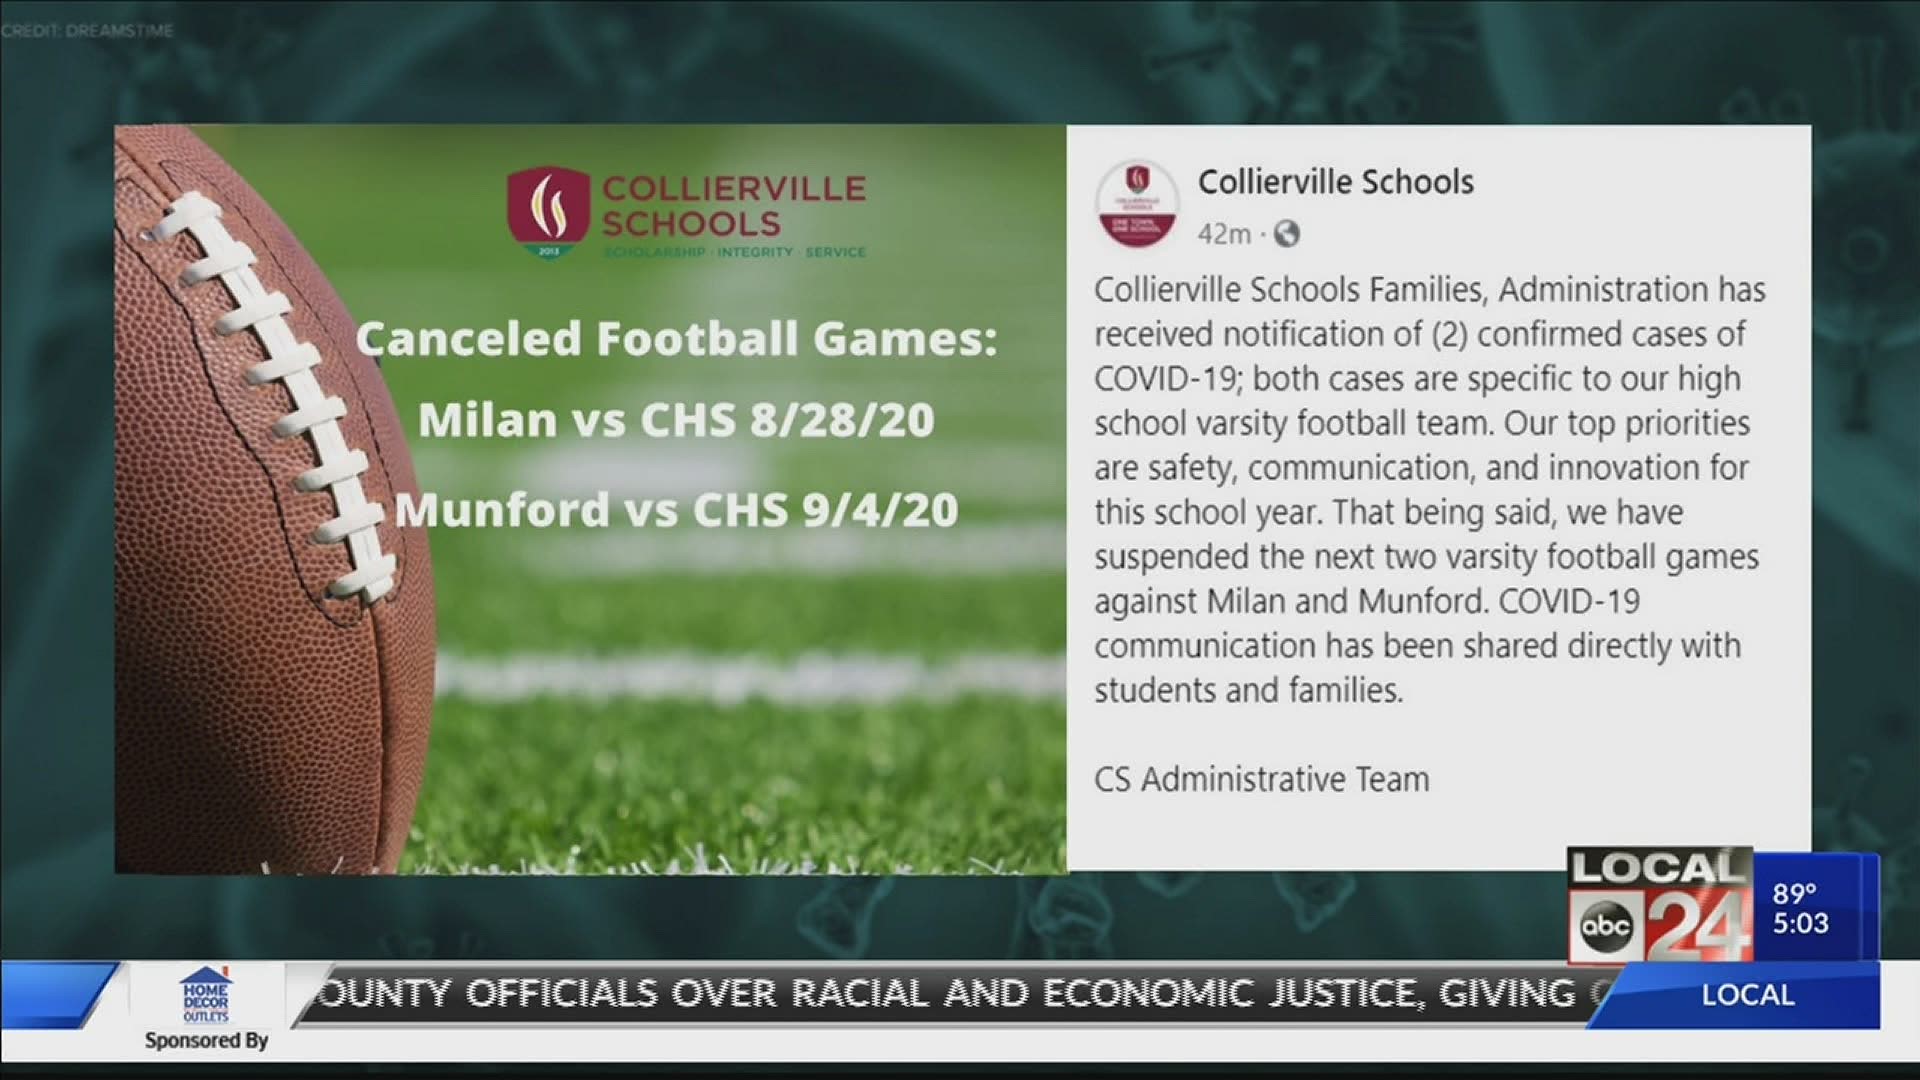 The district says the cases are “specific to the high school varsity football team.”